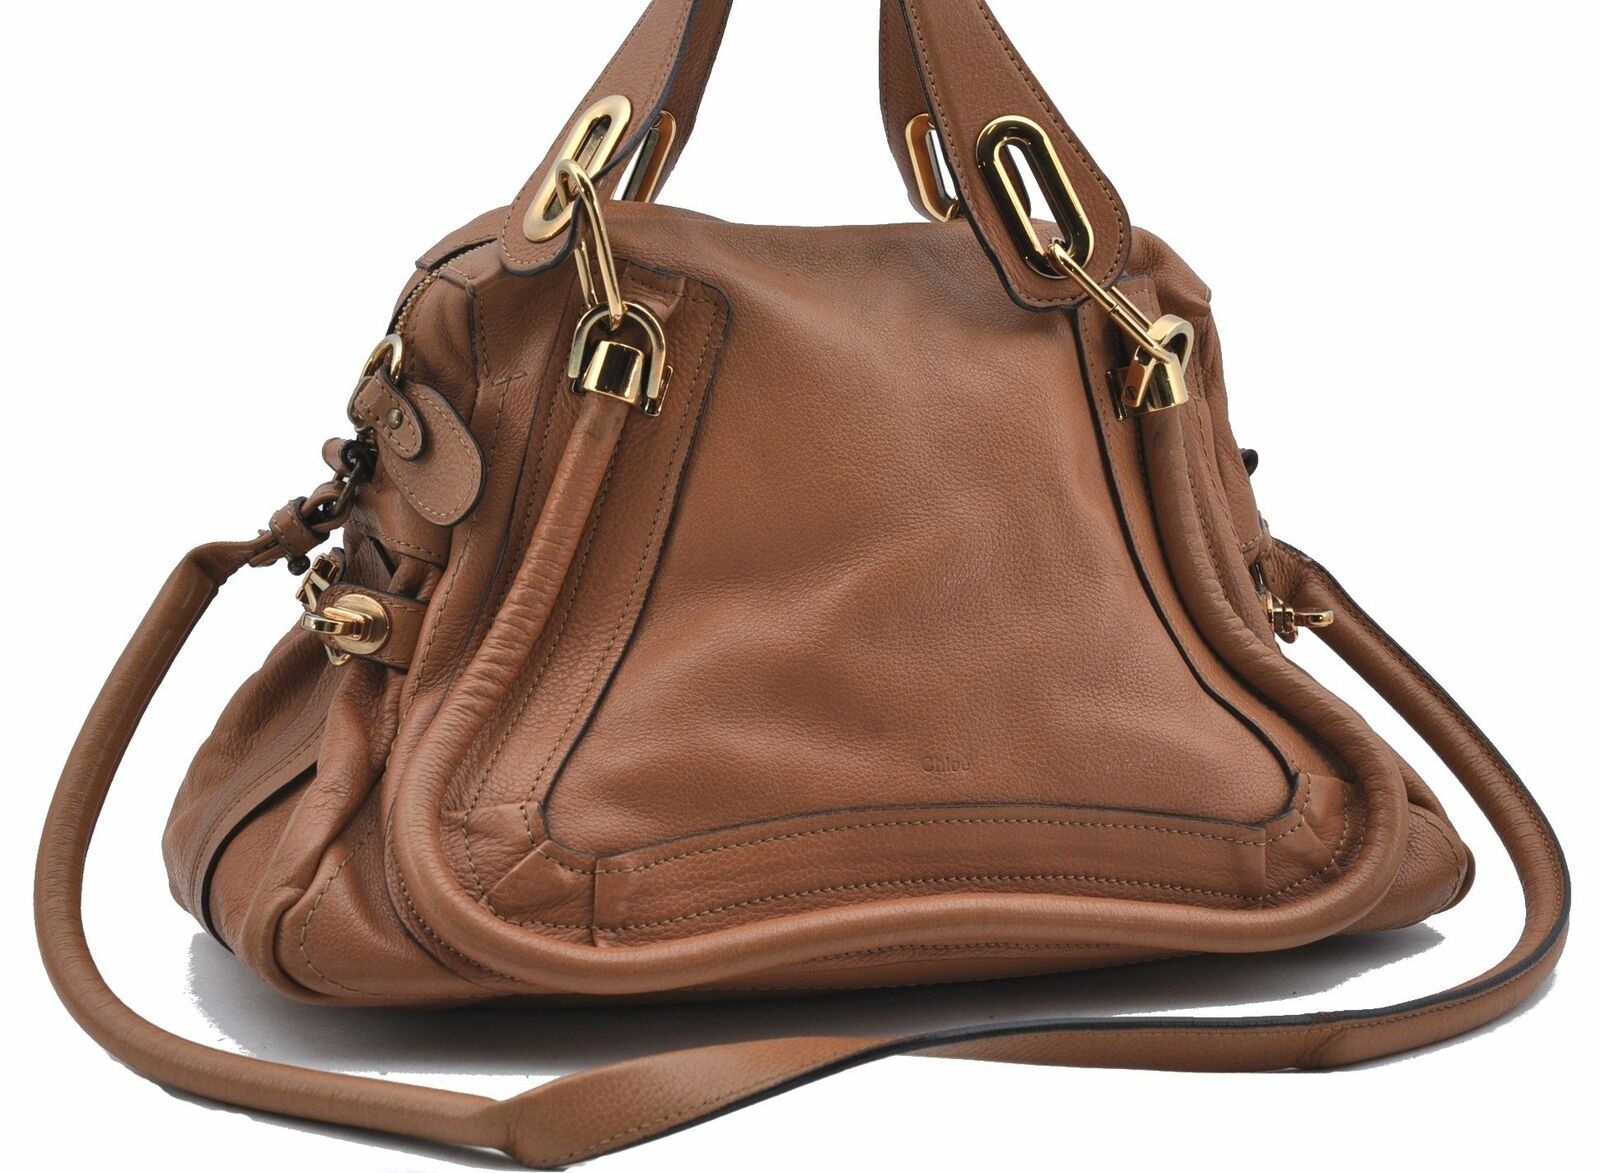 Authentic Chloe Paraty 2Way Shoulder Hand Bag Leather Brown E9762